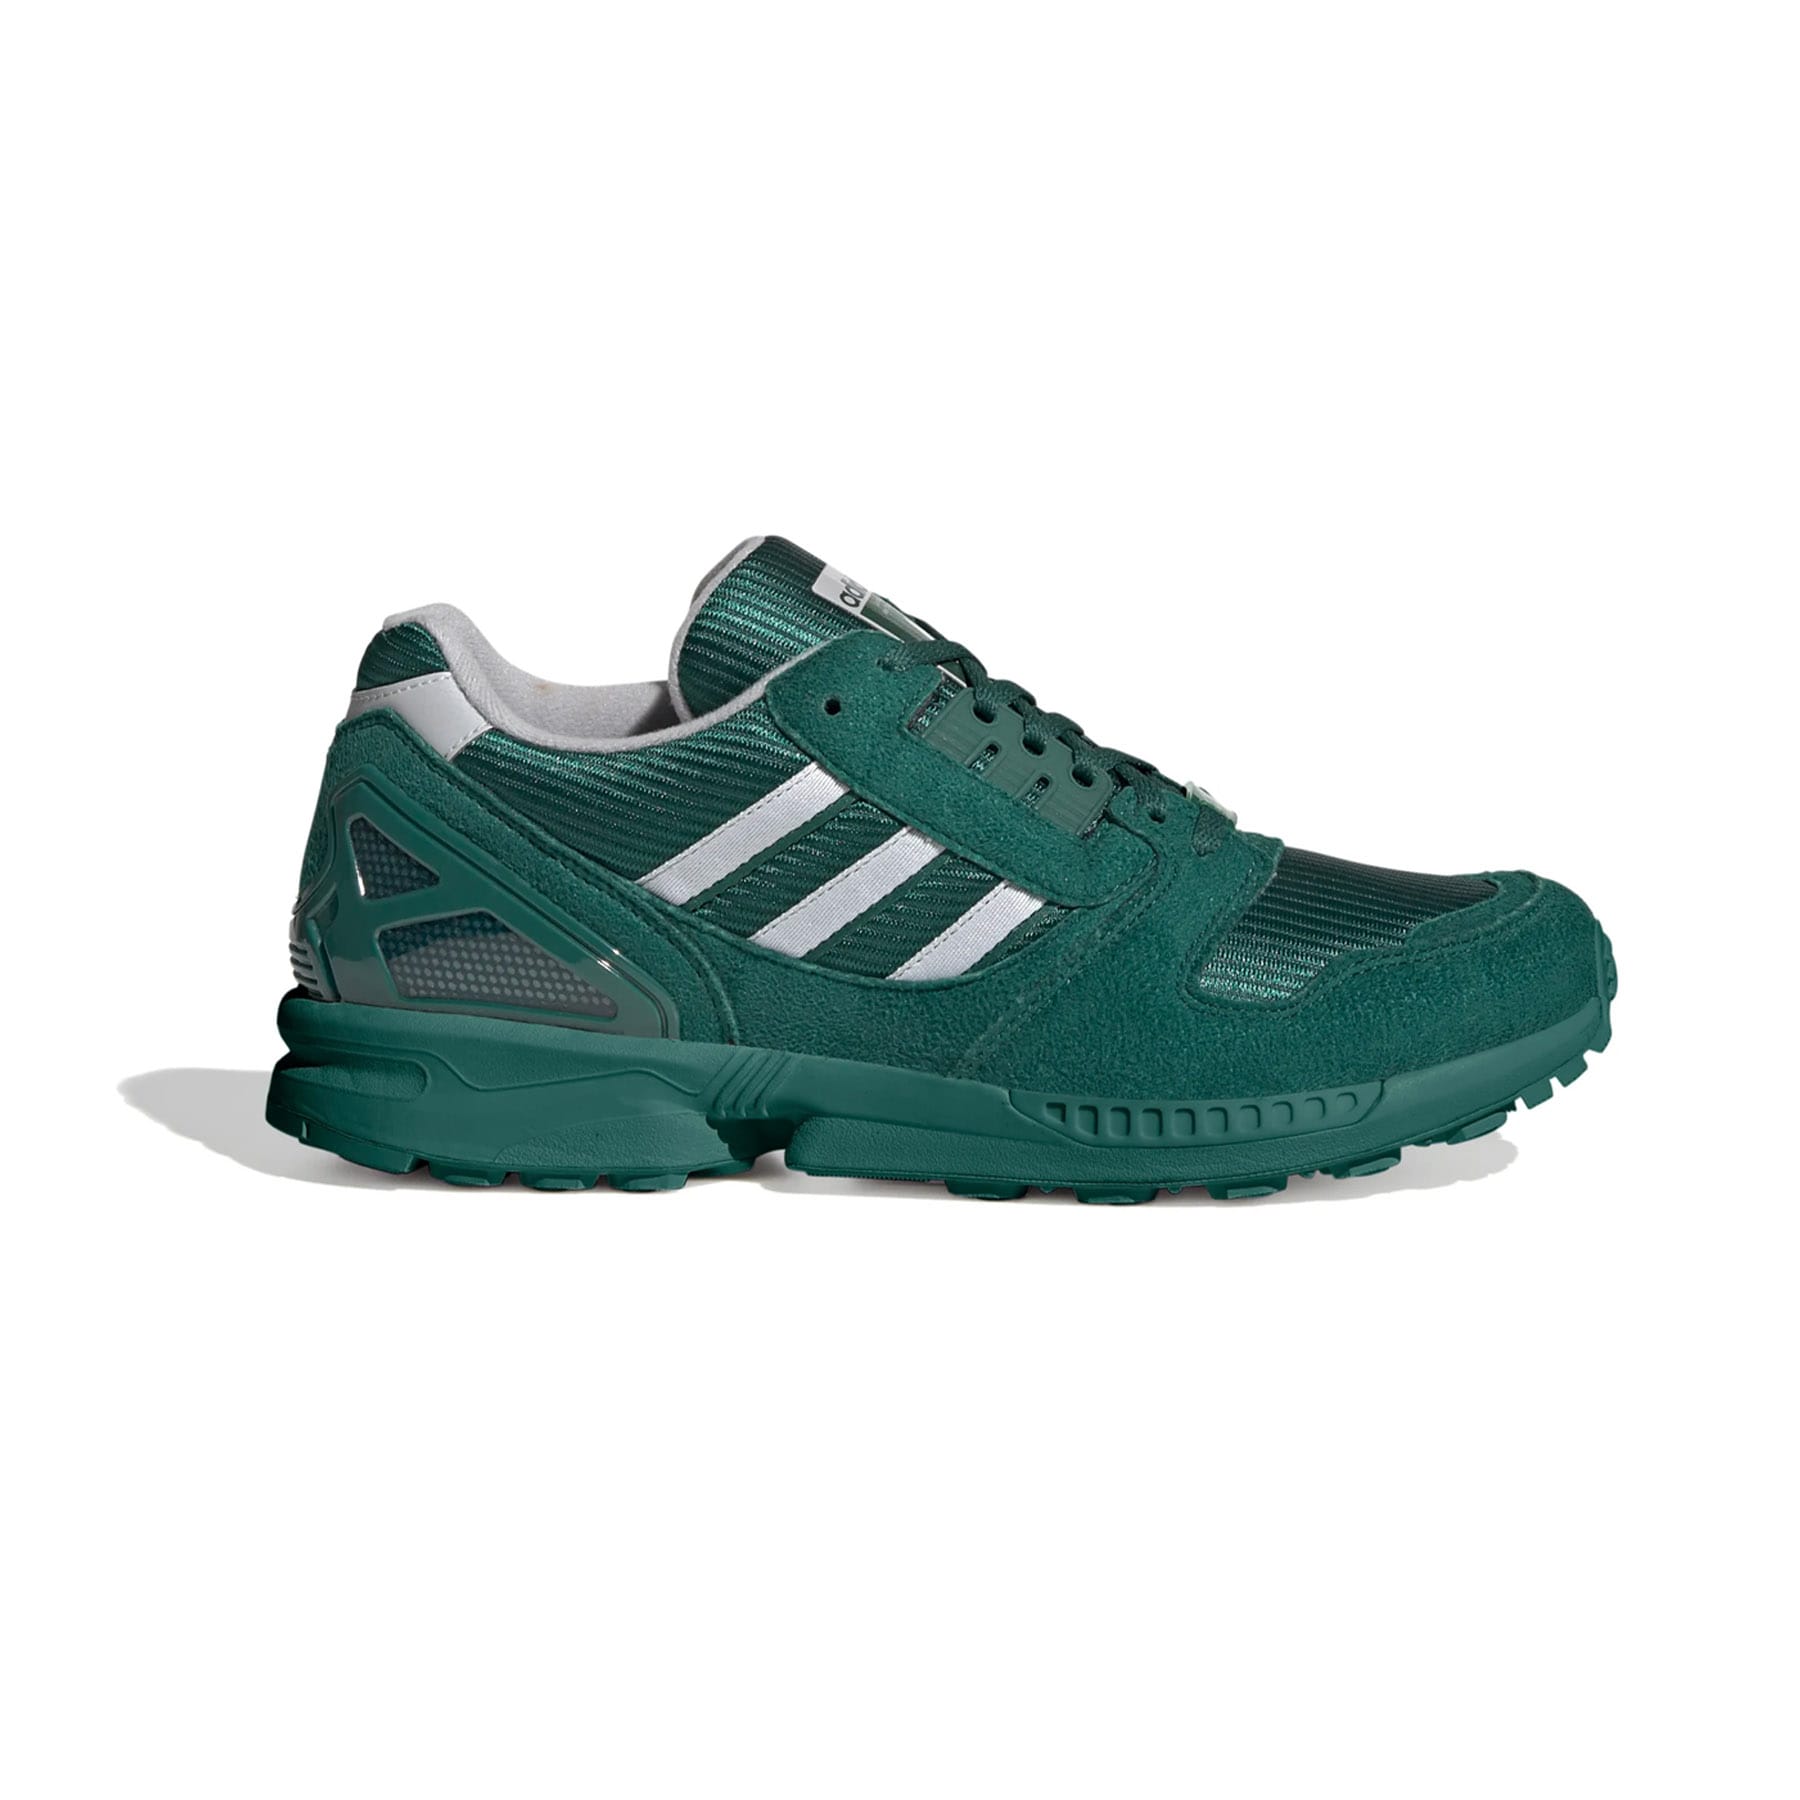 adidas zx 800 homme or